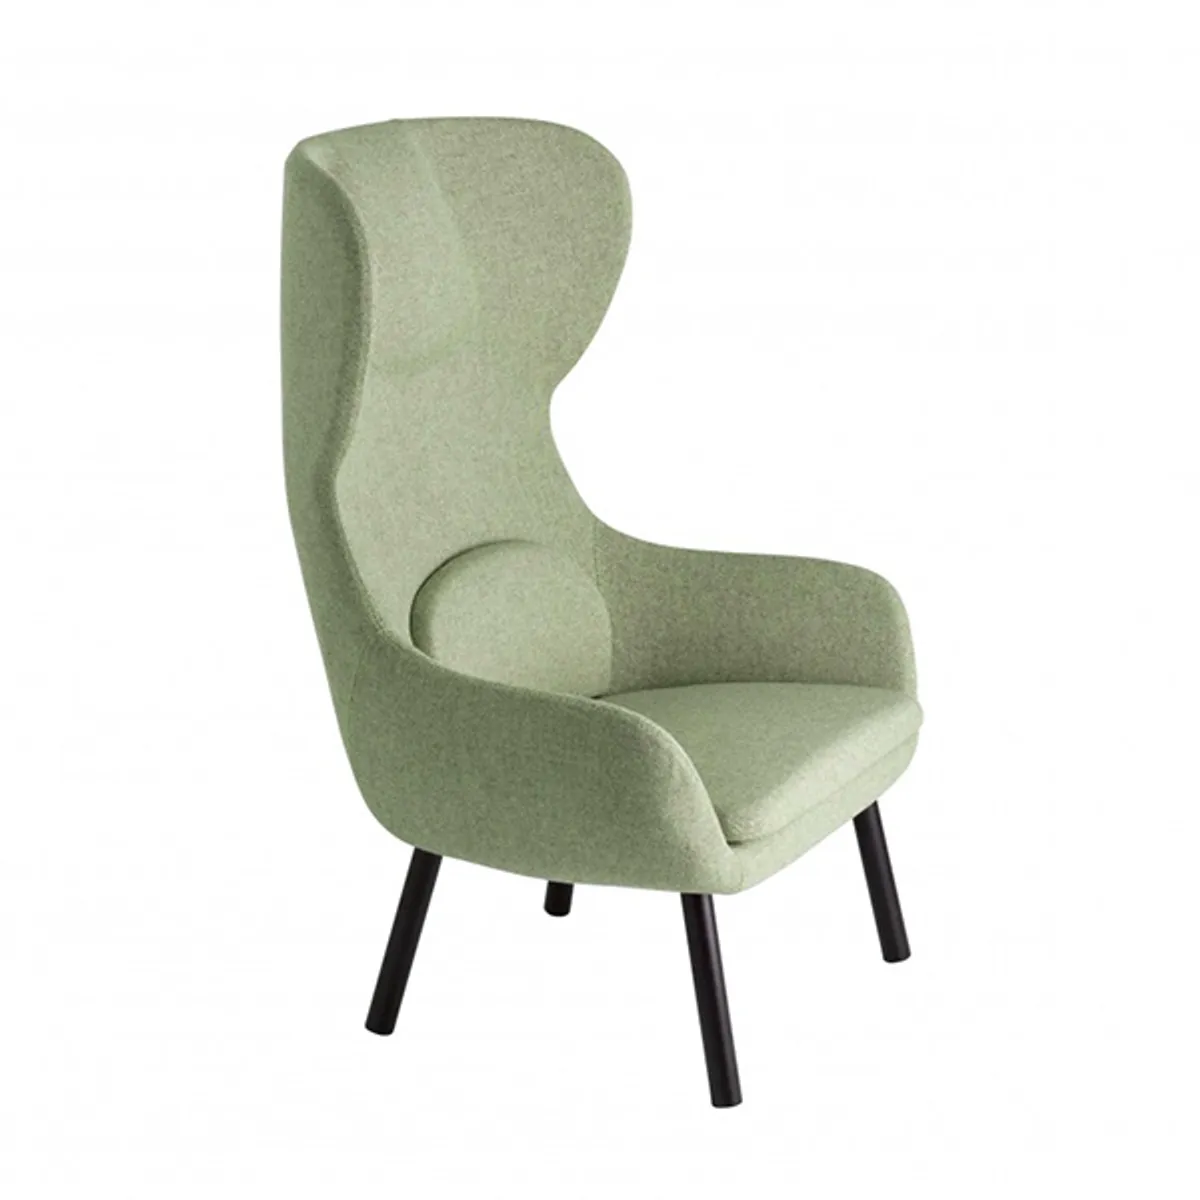 Myra Wing Back Chair In Green With Wooden Legs 682